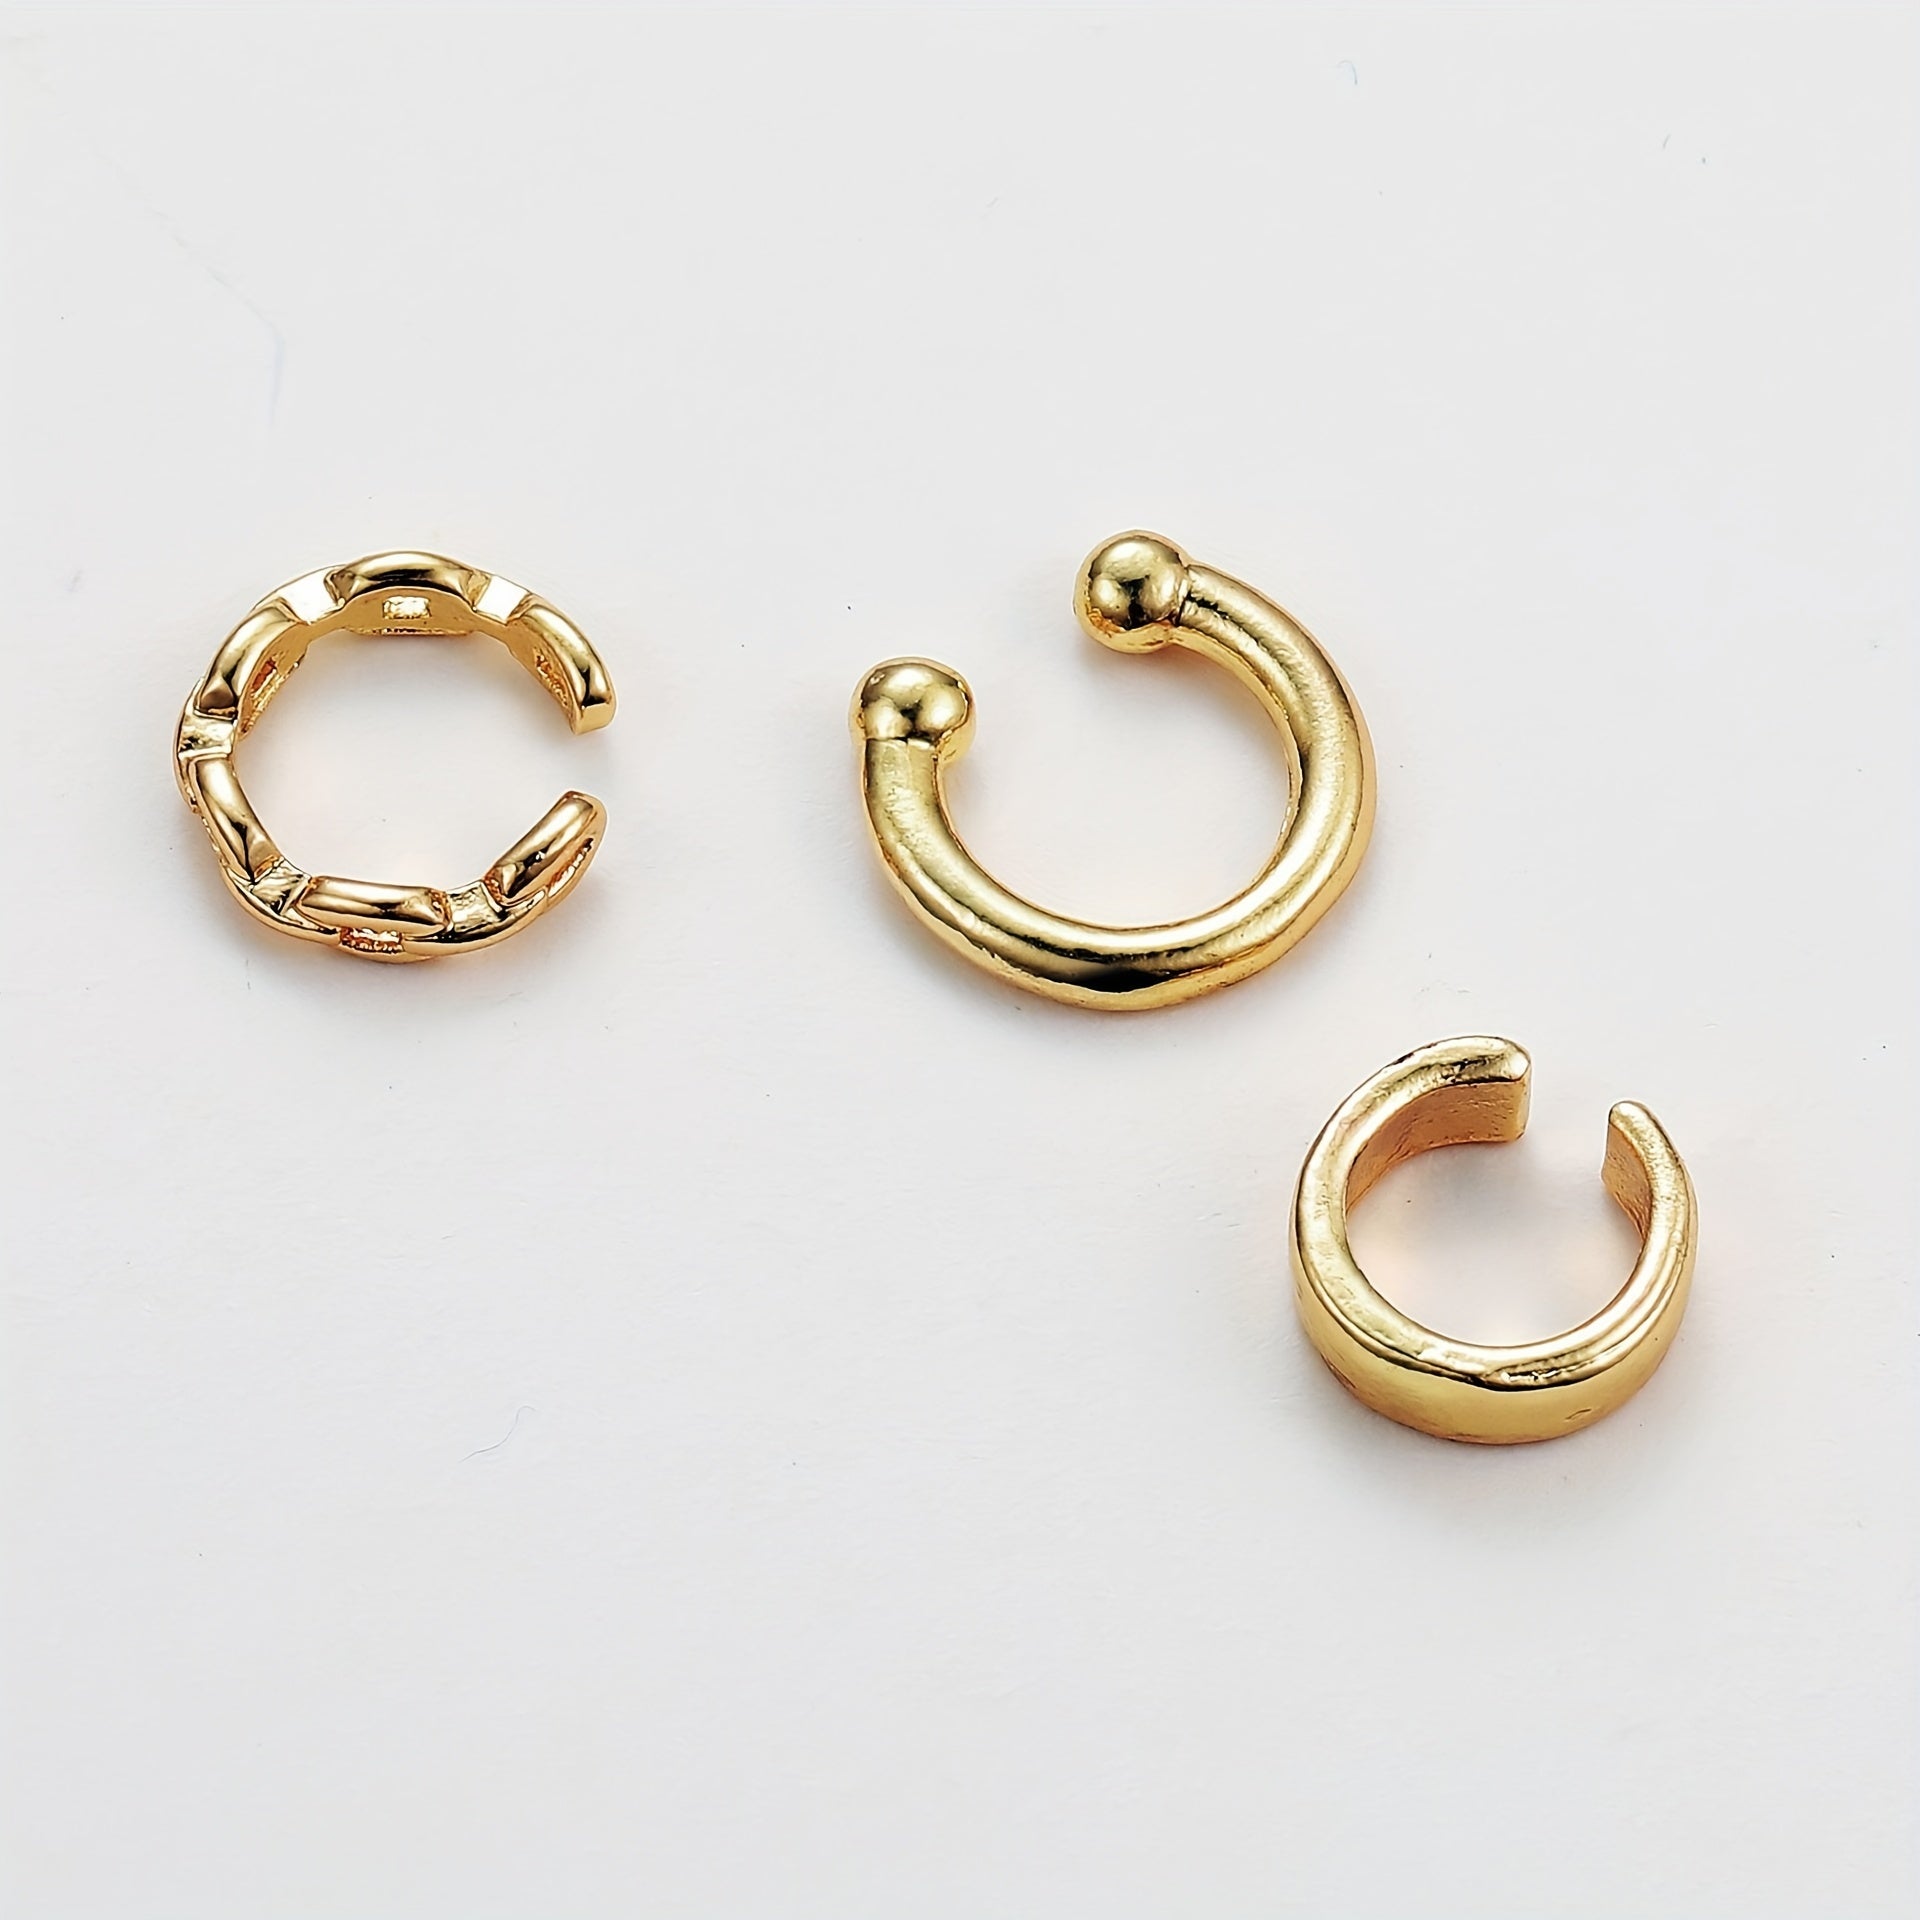 3 Pieces Golden Ear Cuff Retro Bohemian Style Zinc Alloy Jewelry Delicate Female Gift Daily Casual